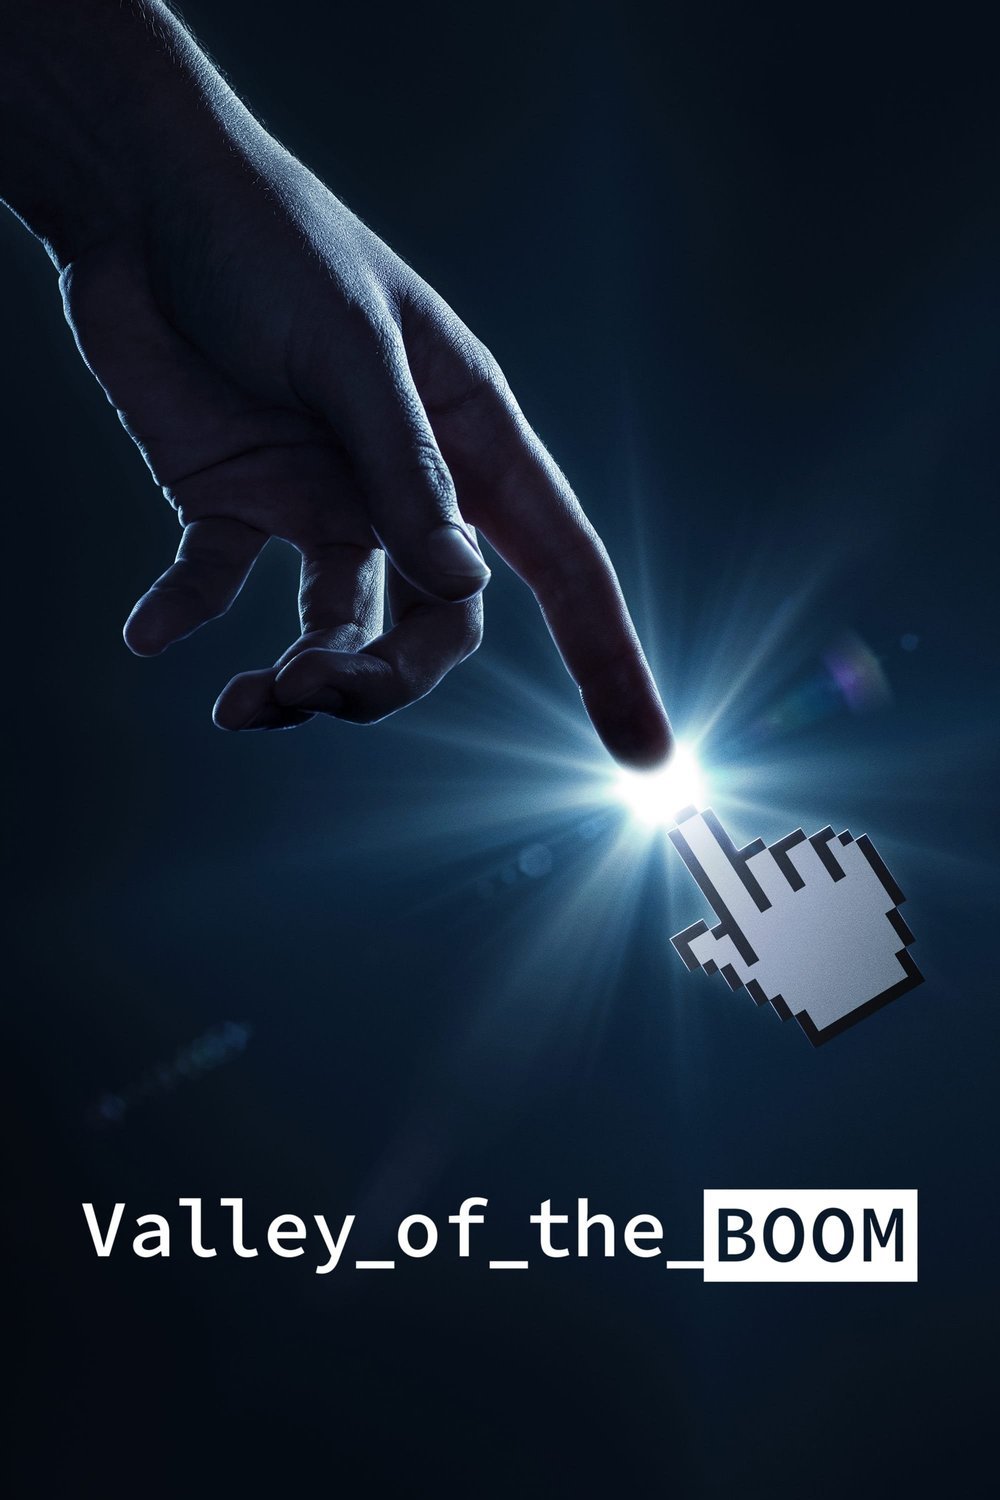 Poster of the movie Valley of the Boom